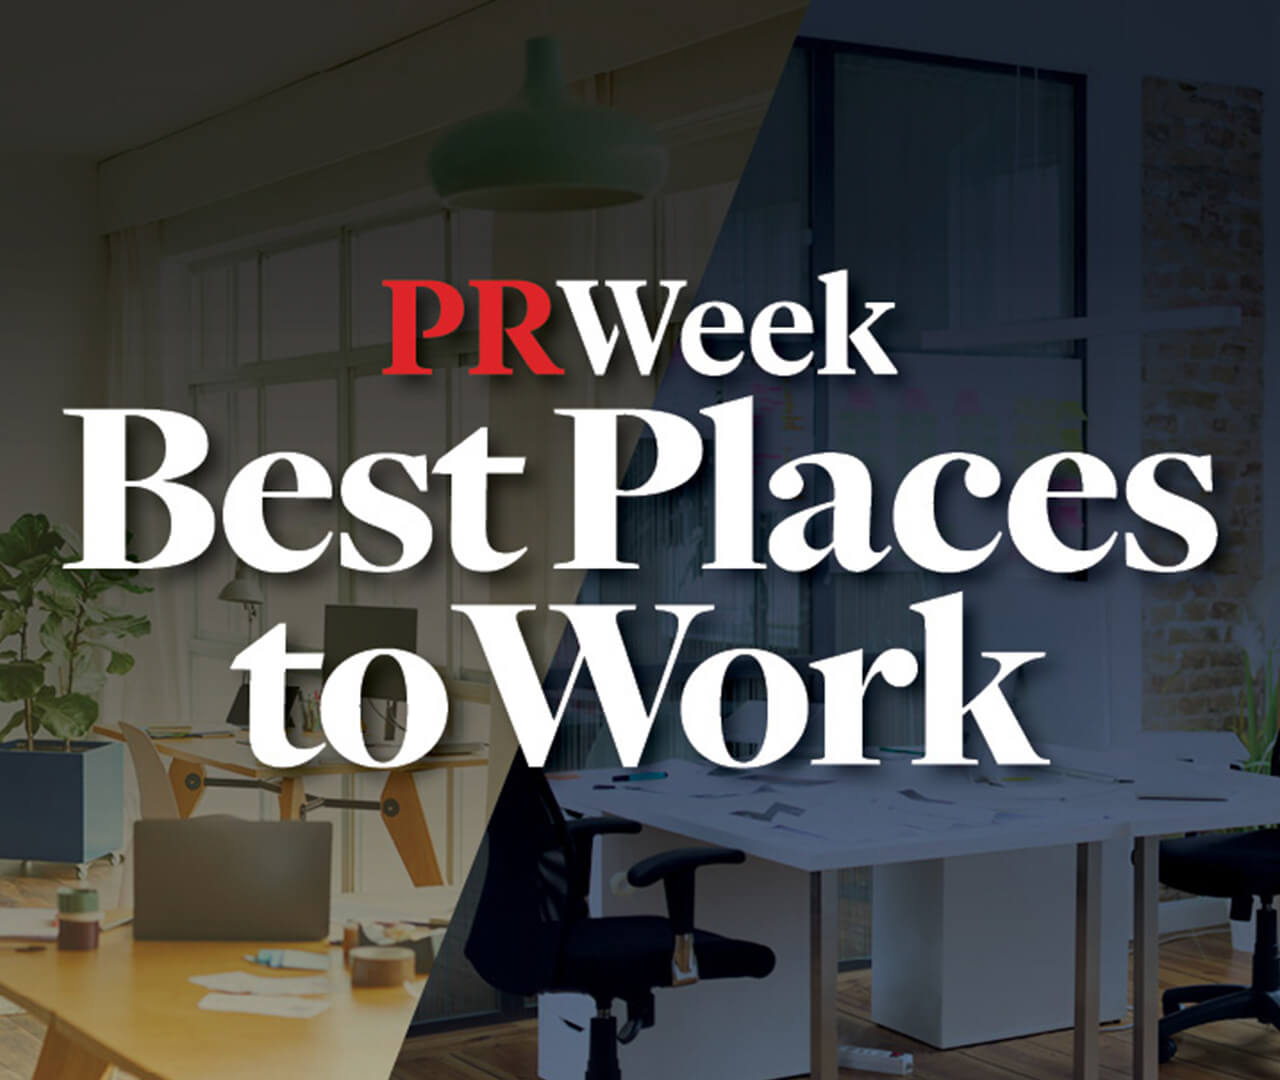 Coyne Public Relations Again Honored as PRWeek's Best Place to Work in 2023